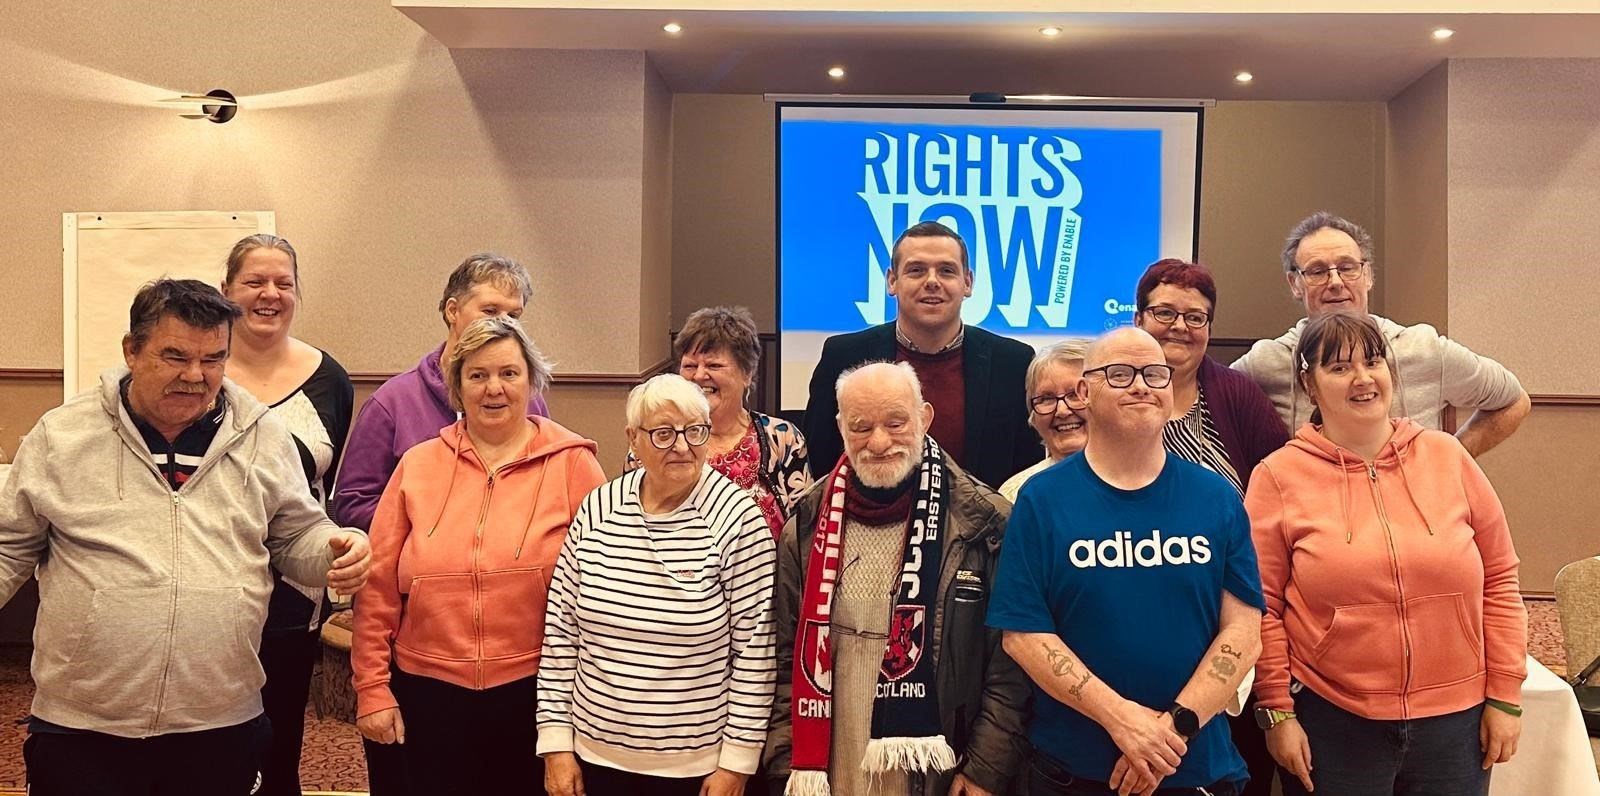 Members of Enable Elgin met with Moray MP Douglas Ross to discuss their Rights Now campaign